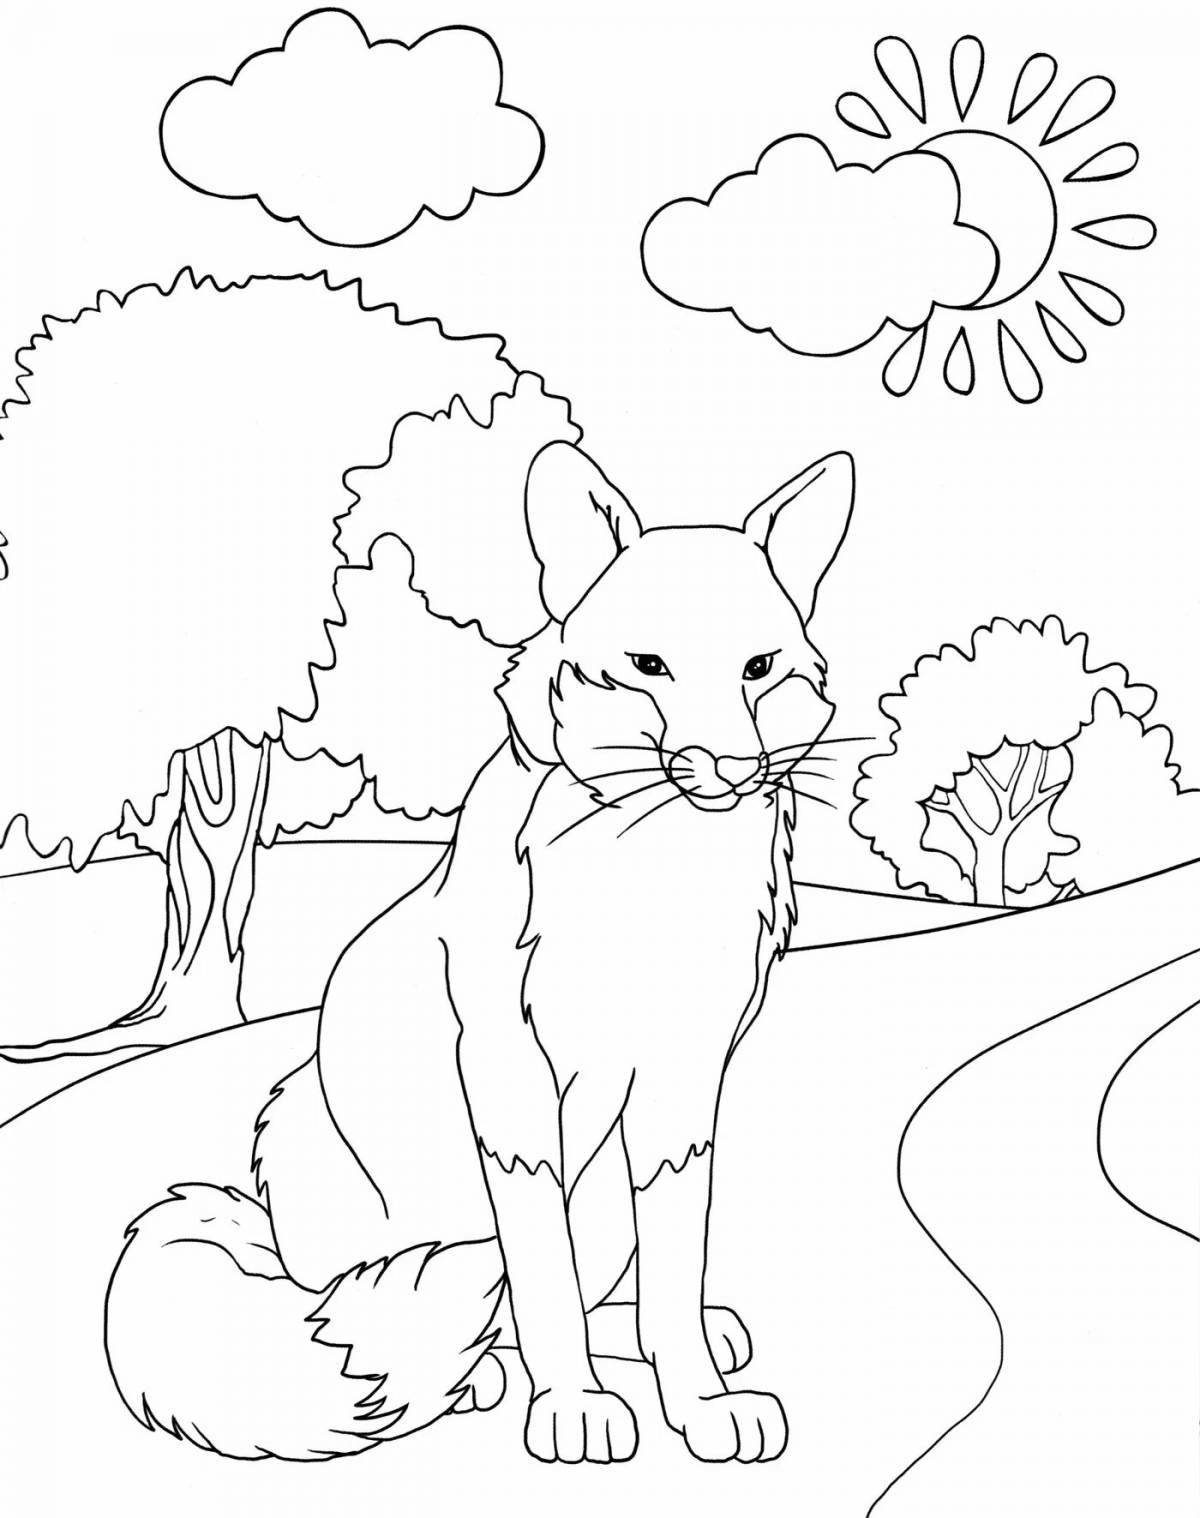 Joyful coloring fox in the forest